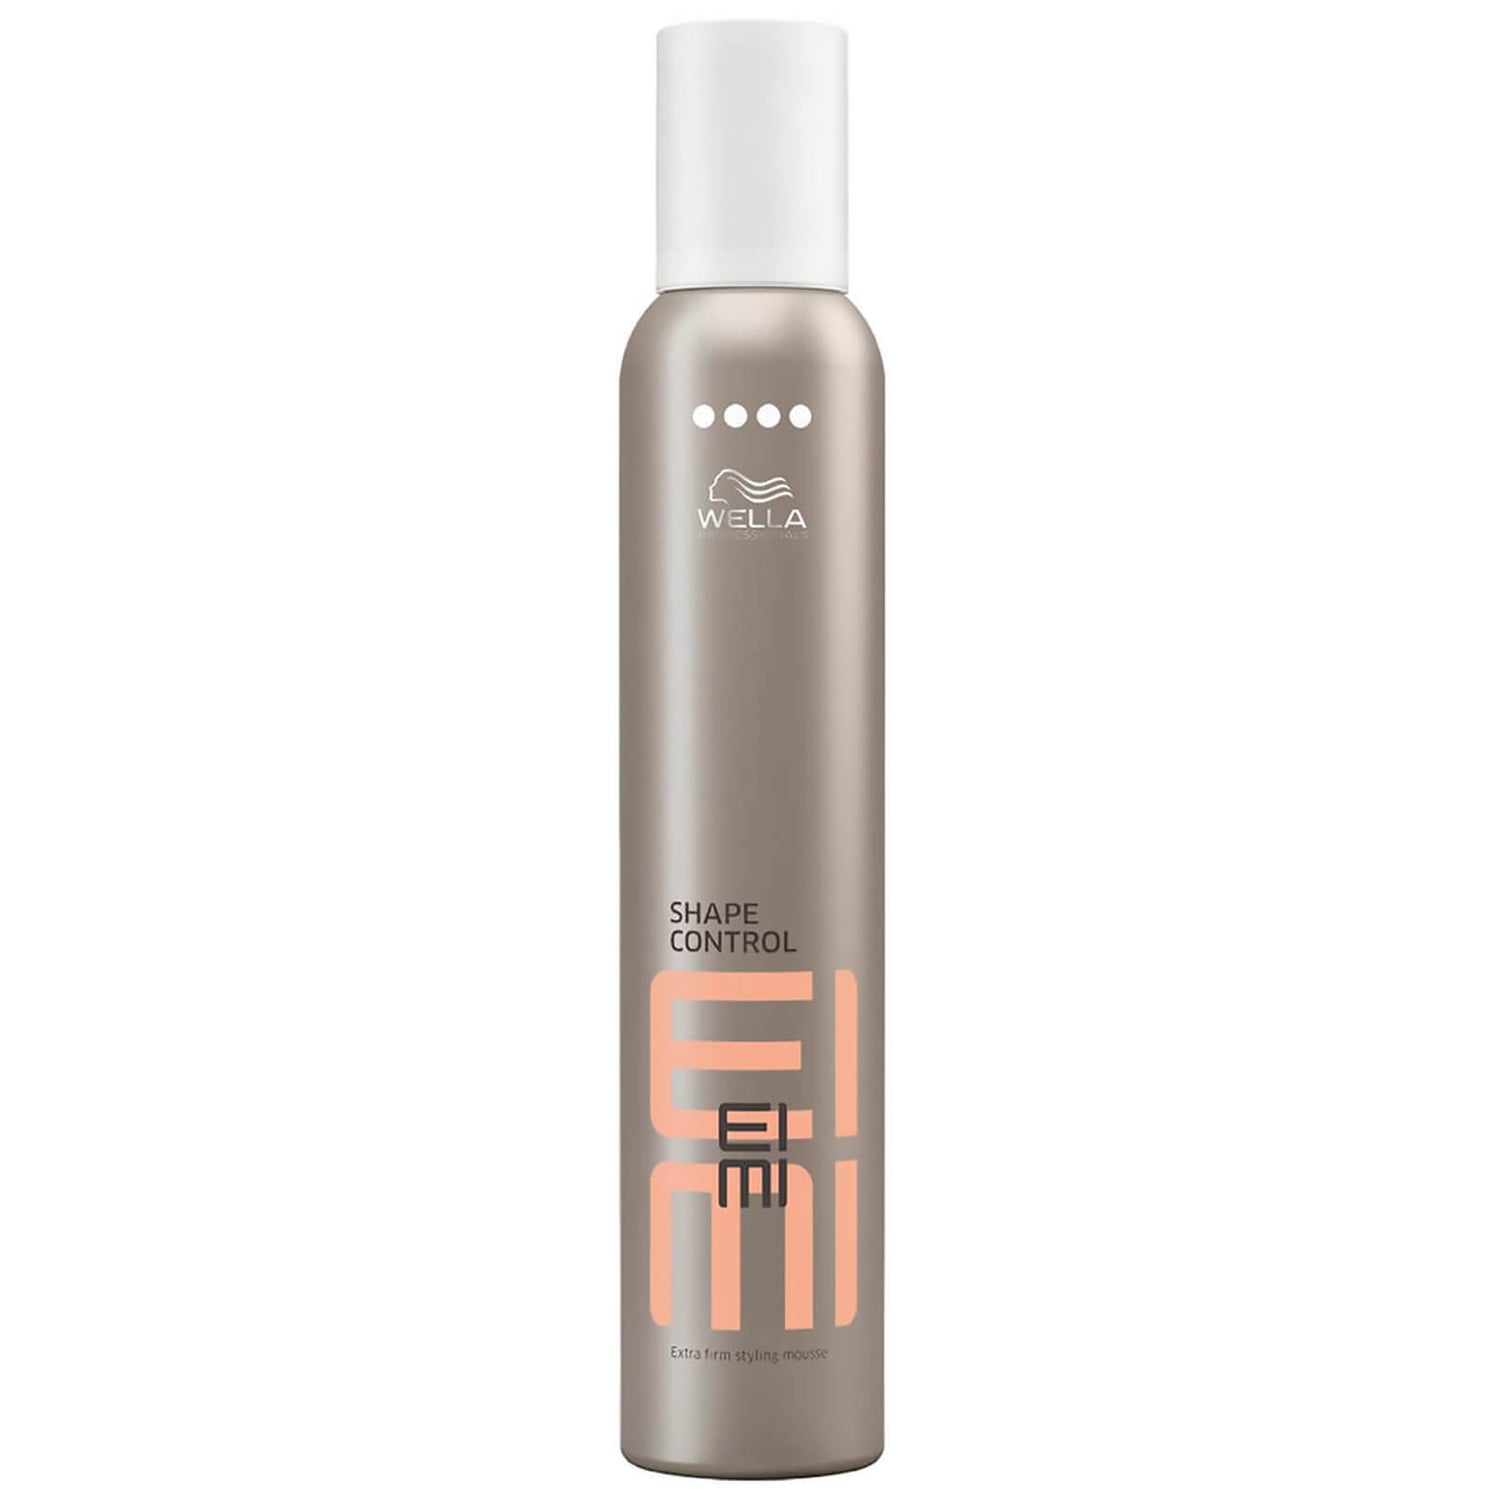 Wella Professionals Wet Shape Control Styling Mousse 300ml